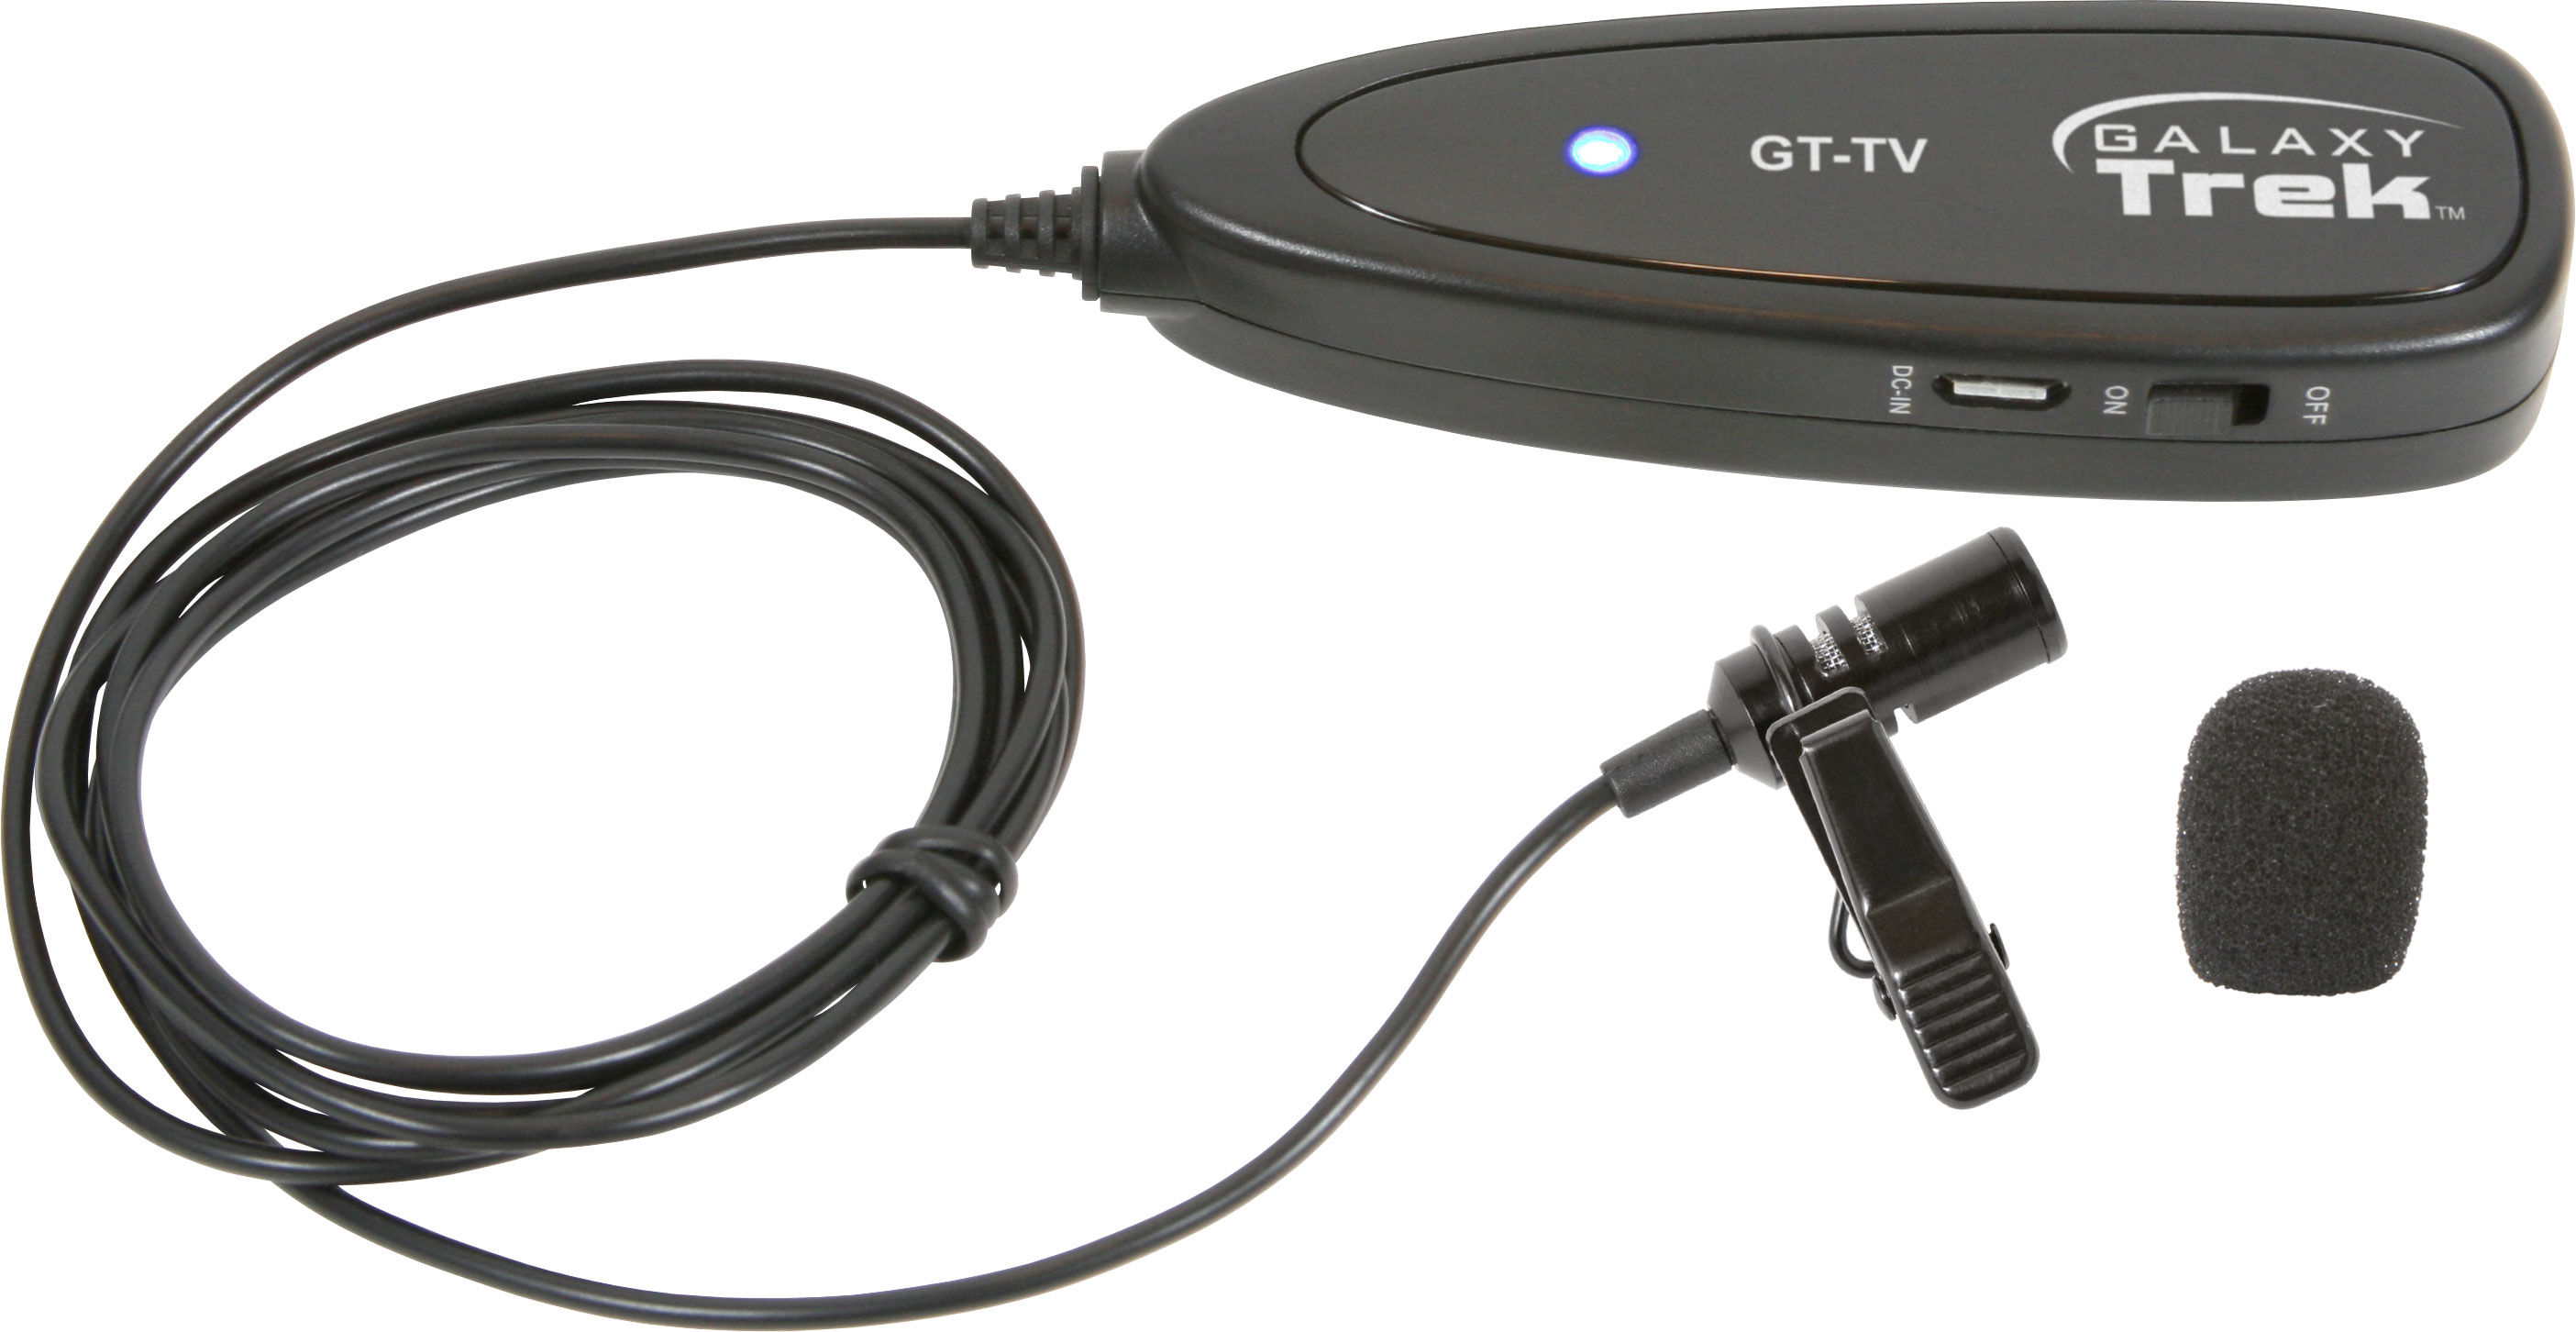 Portable Wireless Lavalier Microphone System | Galaxy Audio